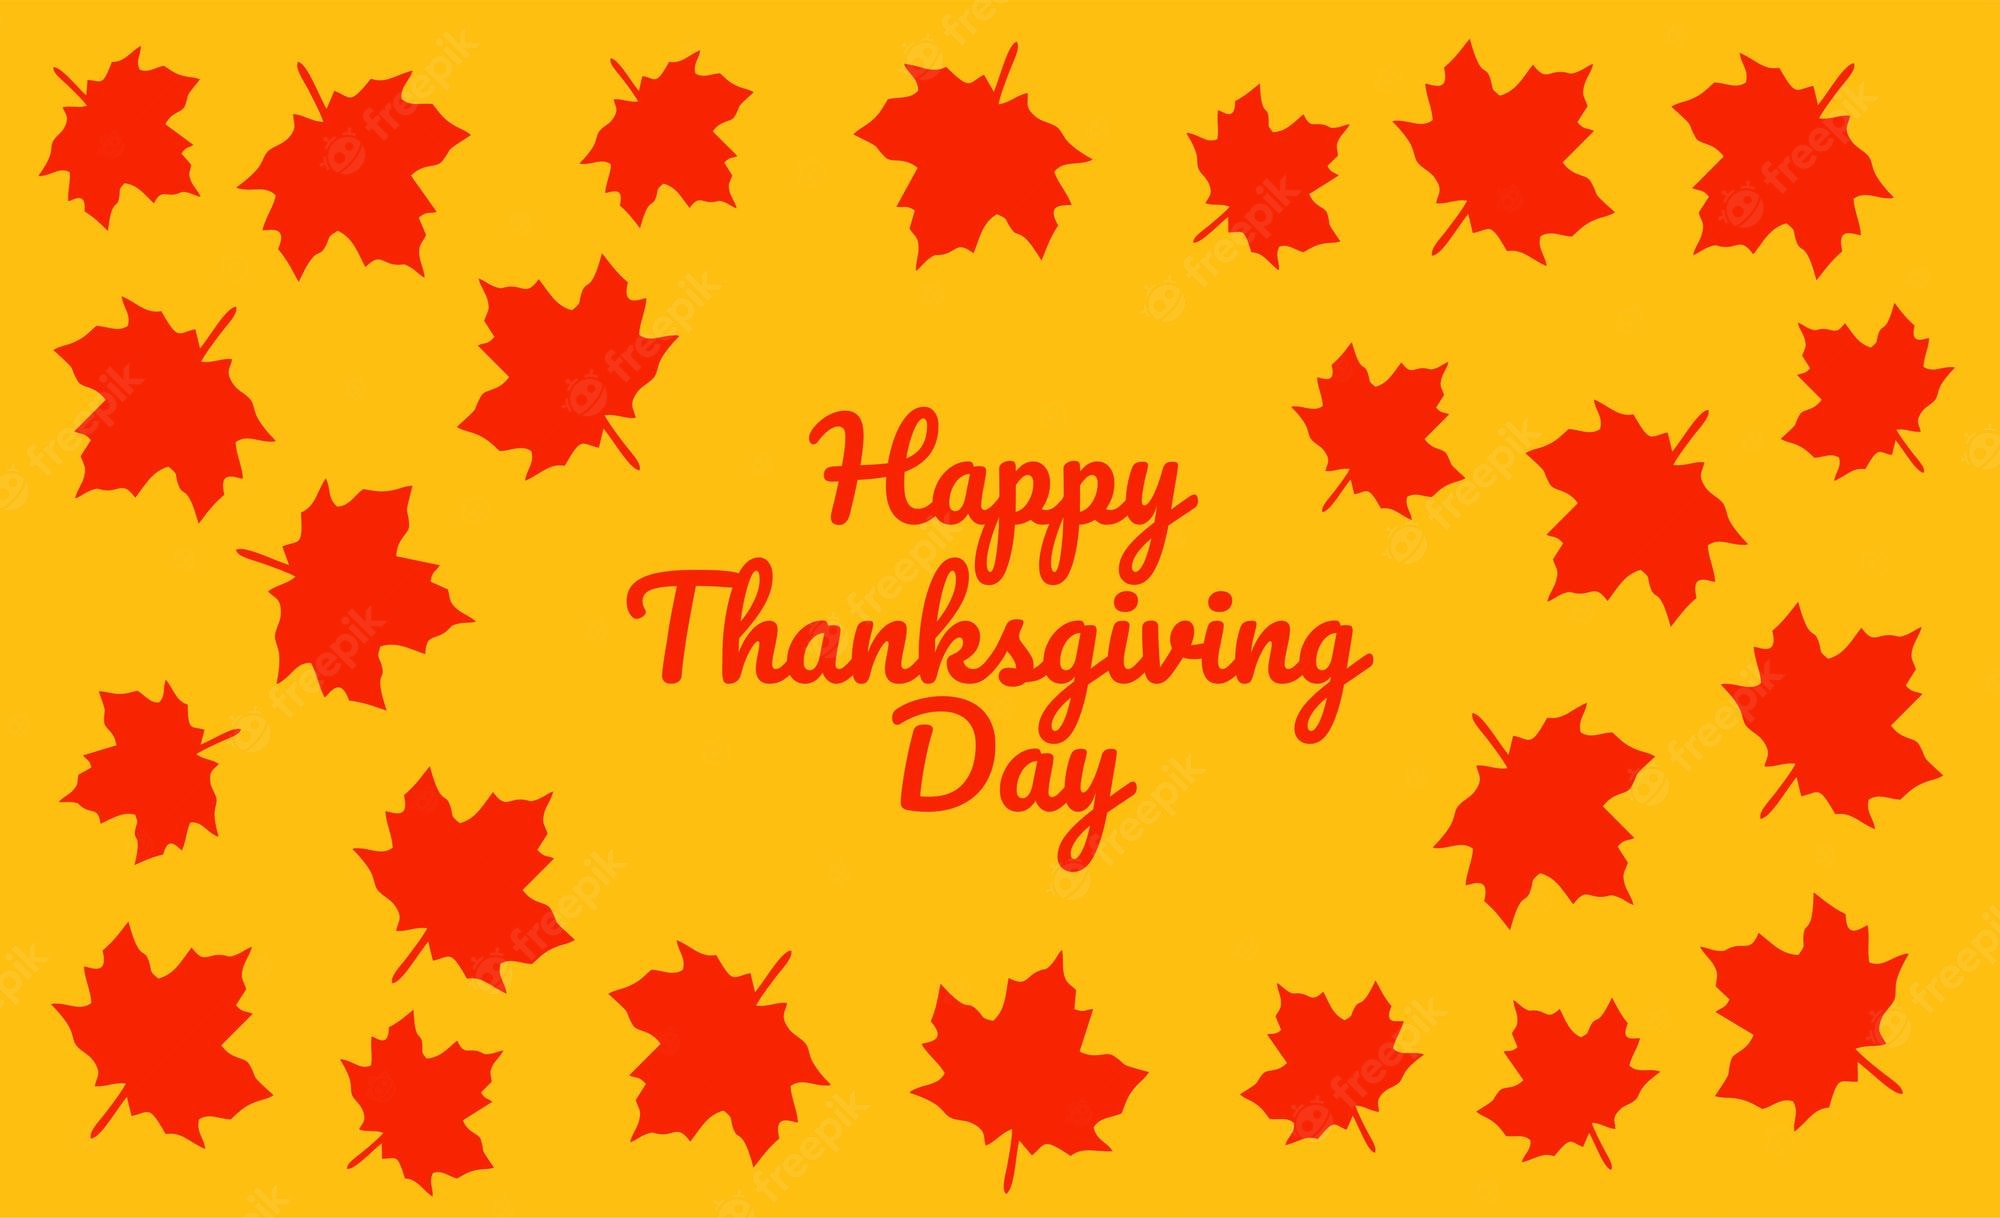 Premium Vector. Happy thanksgiving background with maple leaf pattern ornament